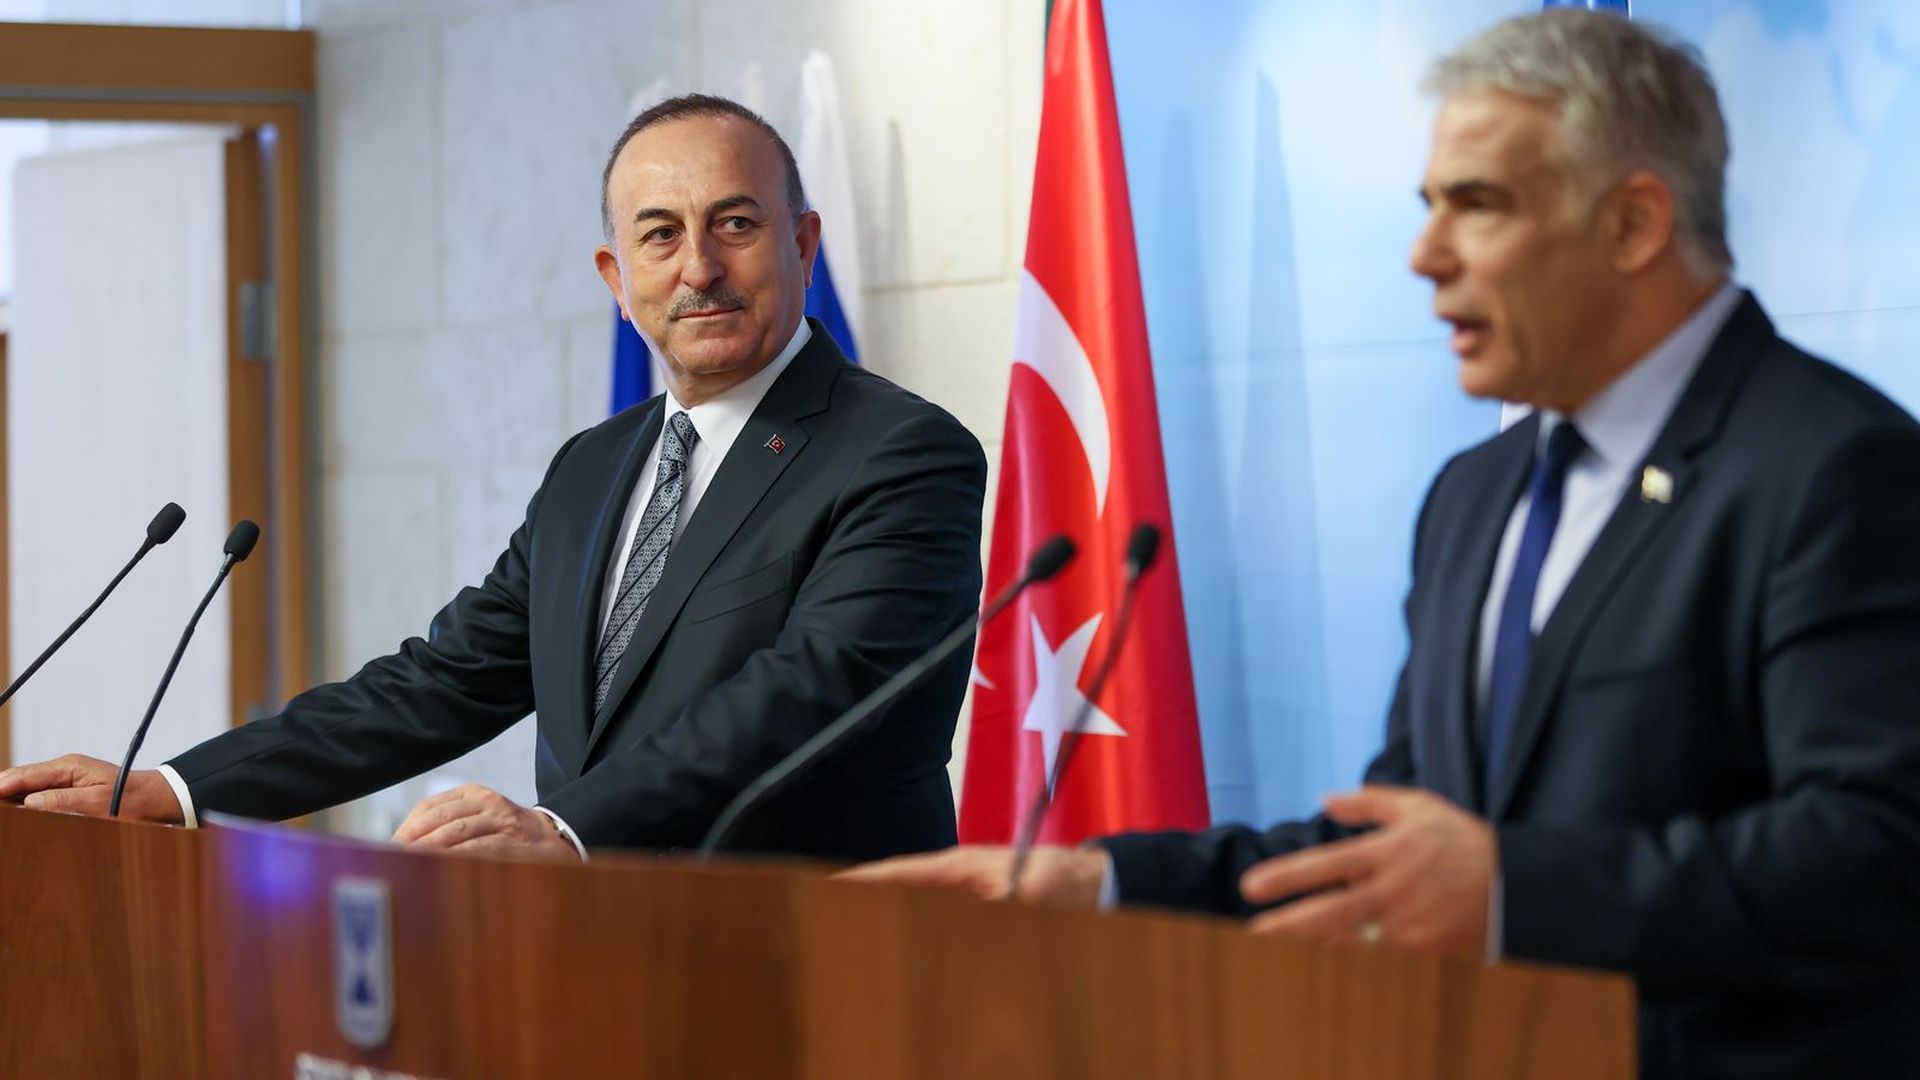 Turkish Foreign Minister Mevlüt Çavuşoğlu (left) and Israeli Foreign Minister Yair Lapid on May 25. Photo: Cem Ozdel/Anadolu Agency via Getty Images